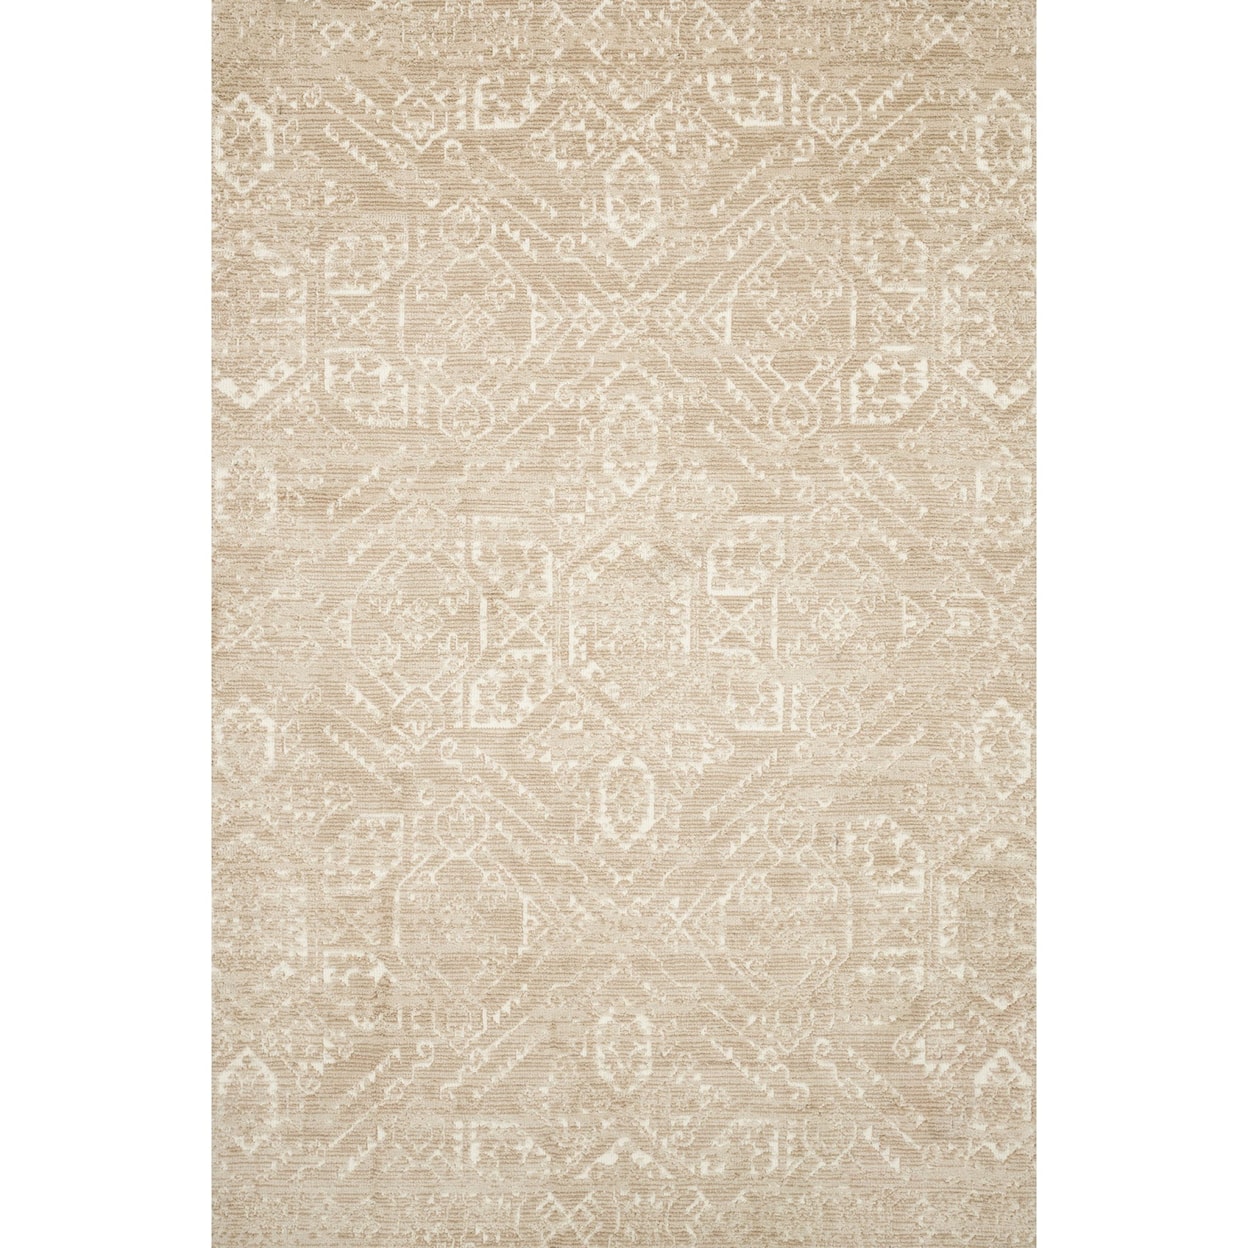 Magnolia Home by Joanna Gaines for Loloi Lotus 1'-6" x 1'-6" Square Rug